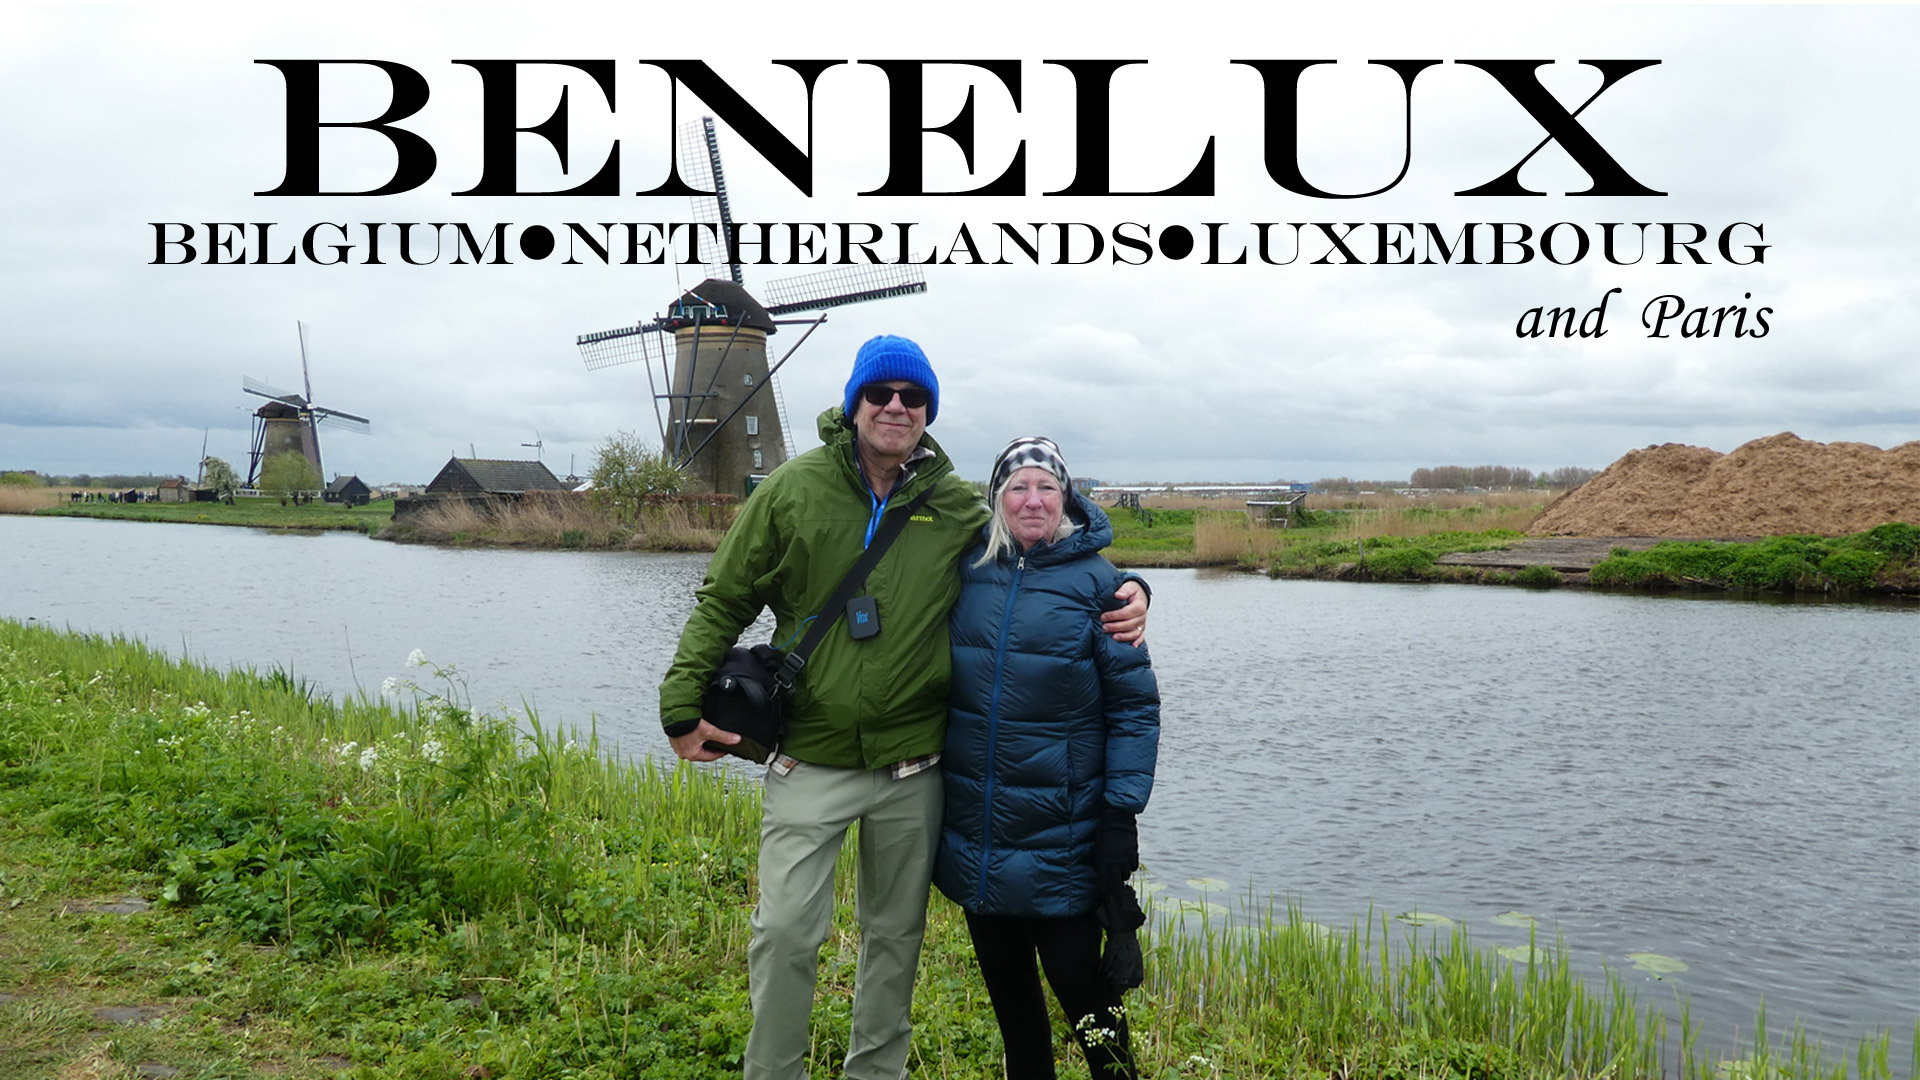 Click to View the Benelux Photo Slide Show